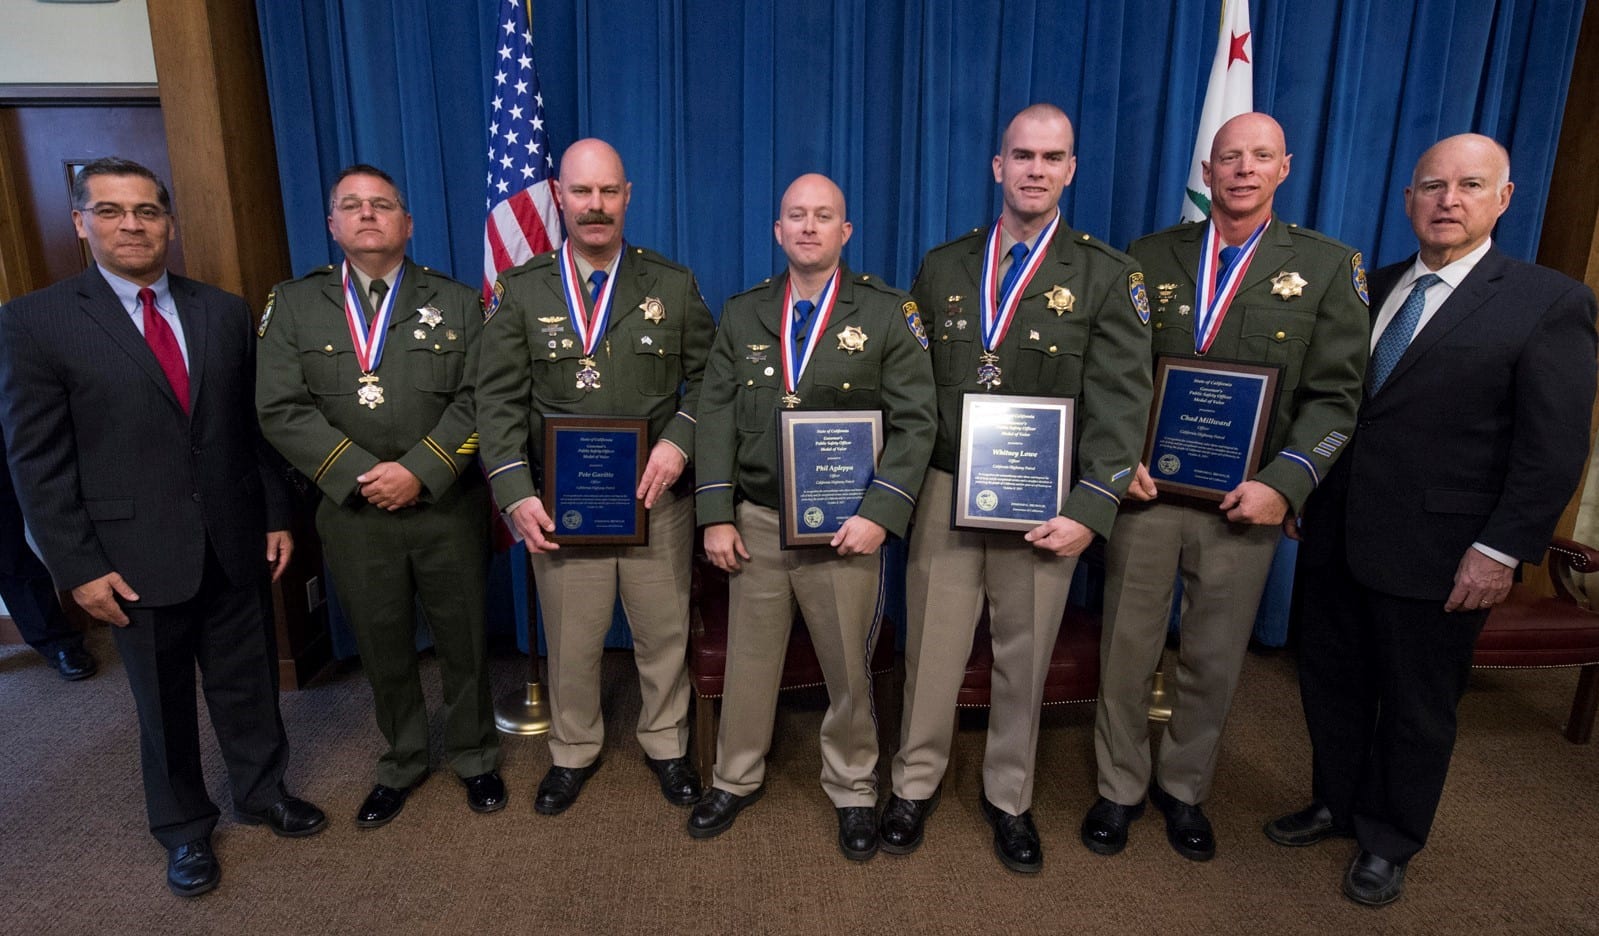 Governor Brown and Attorney General Becerra Honor Five Public Safety Officials with Medal of Valor Awards